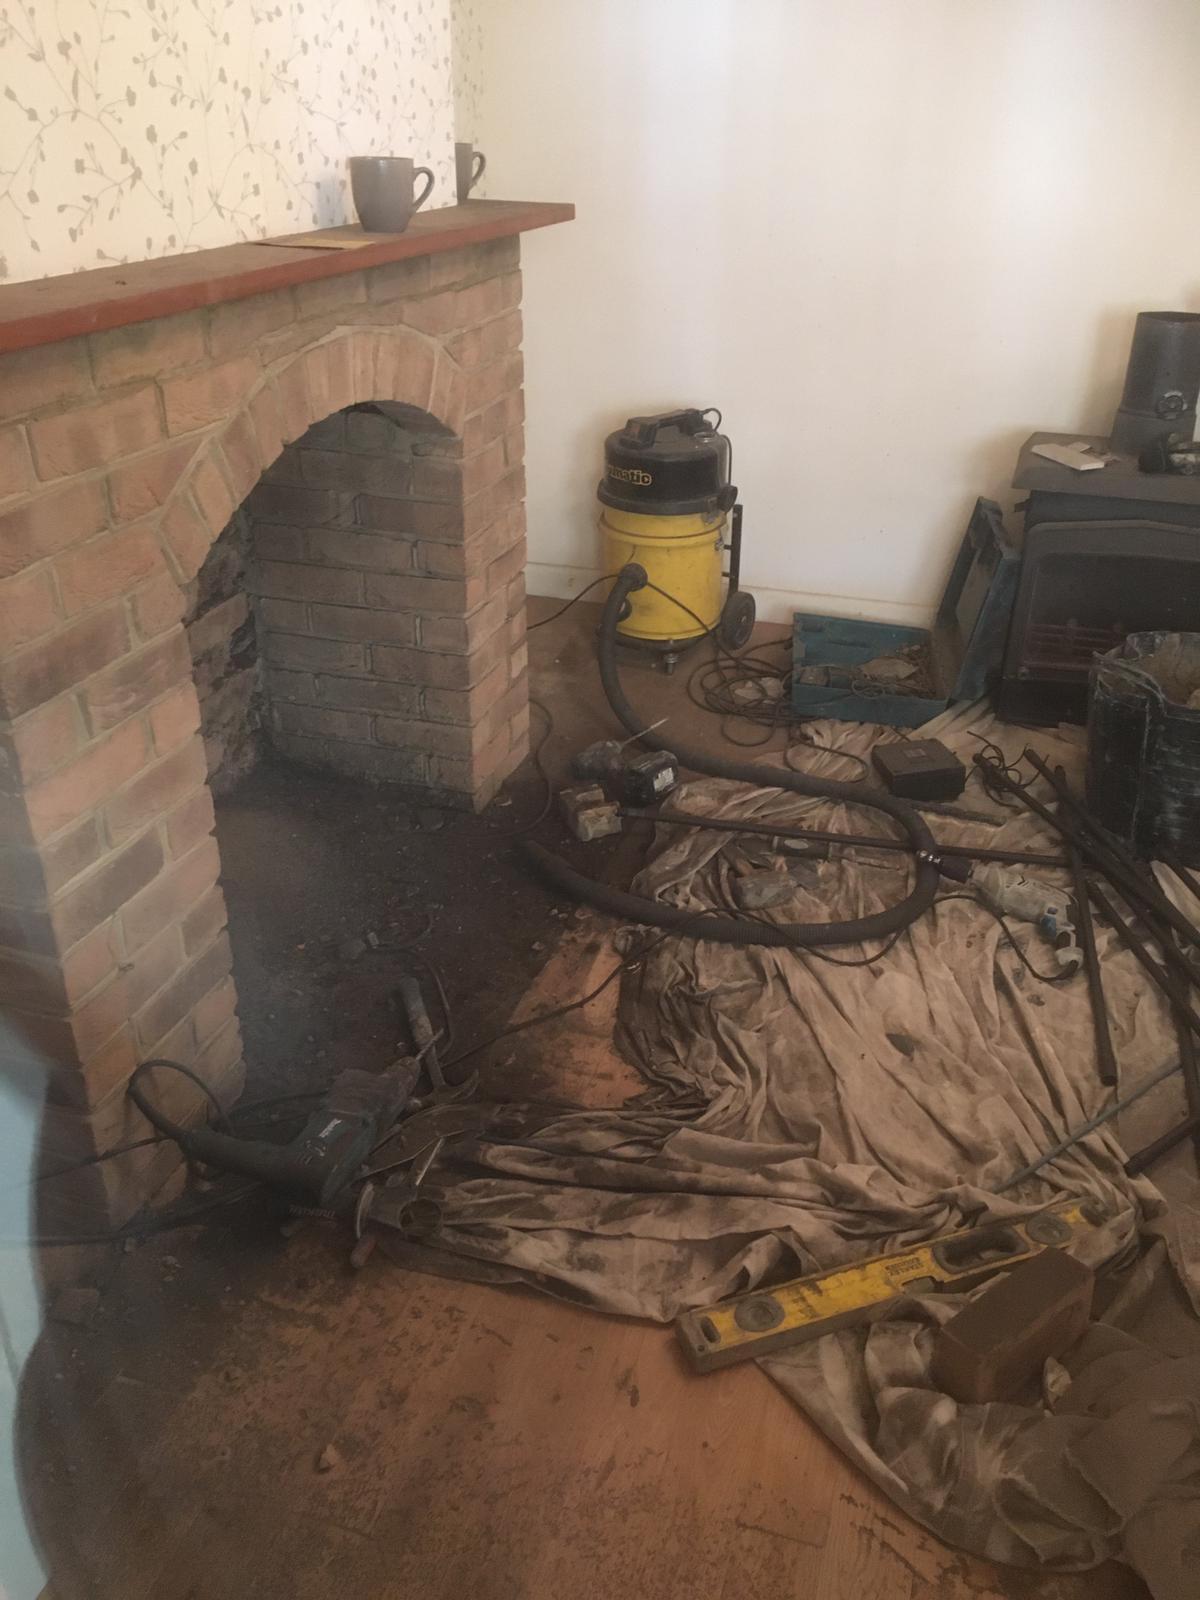 The potential disruption caused with chimney rectification work